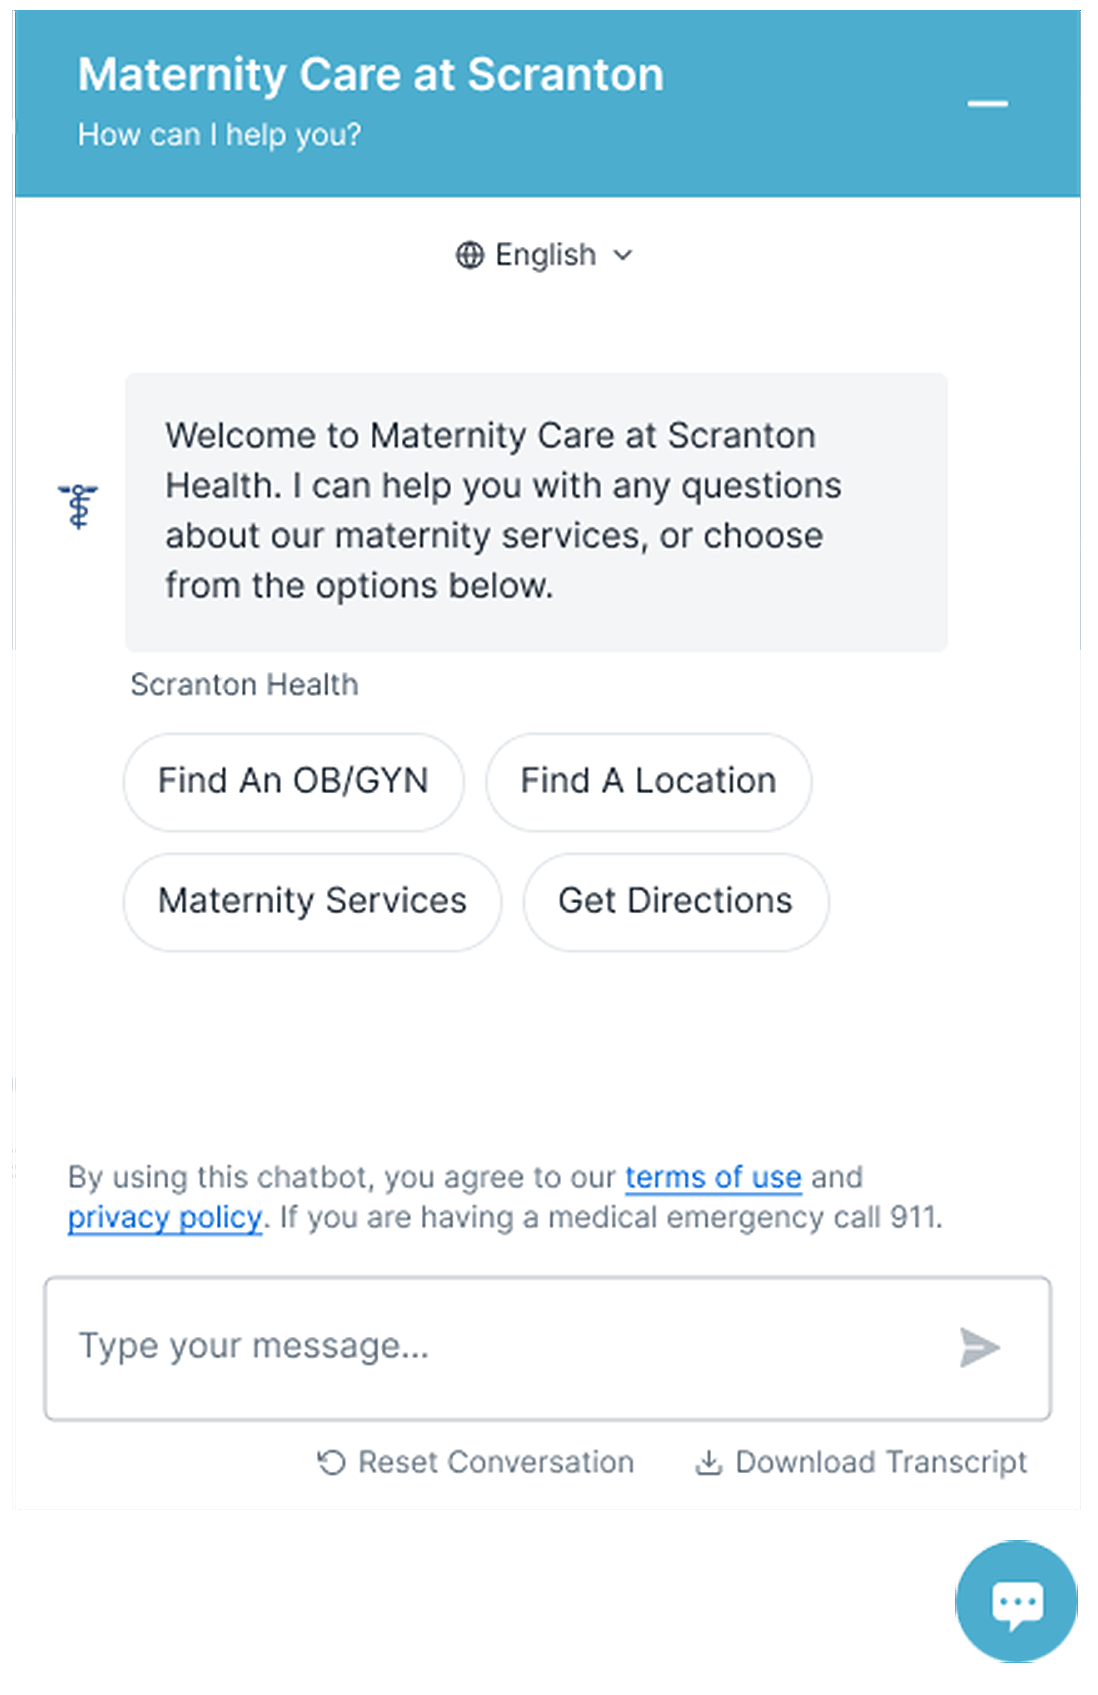 Chatbot support showing pre-populated options to help a user find what they need